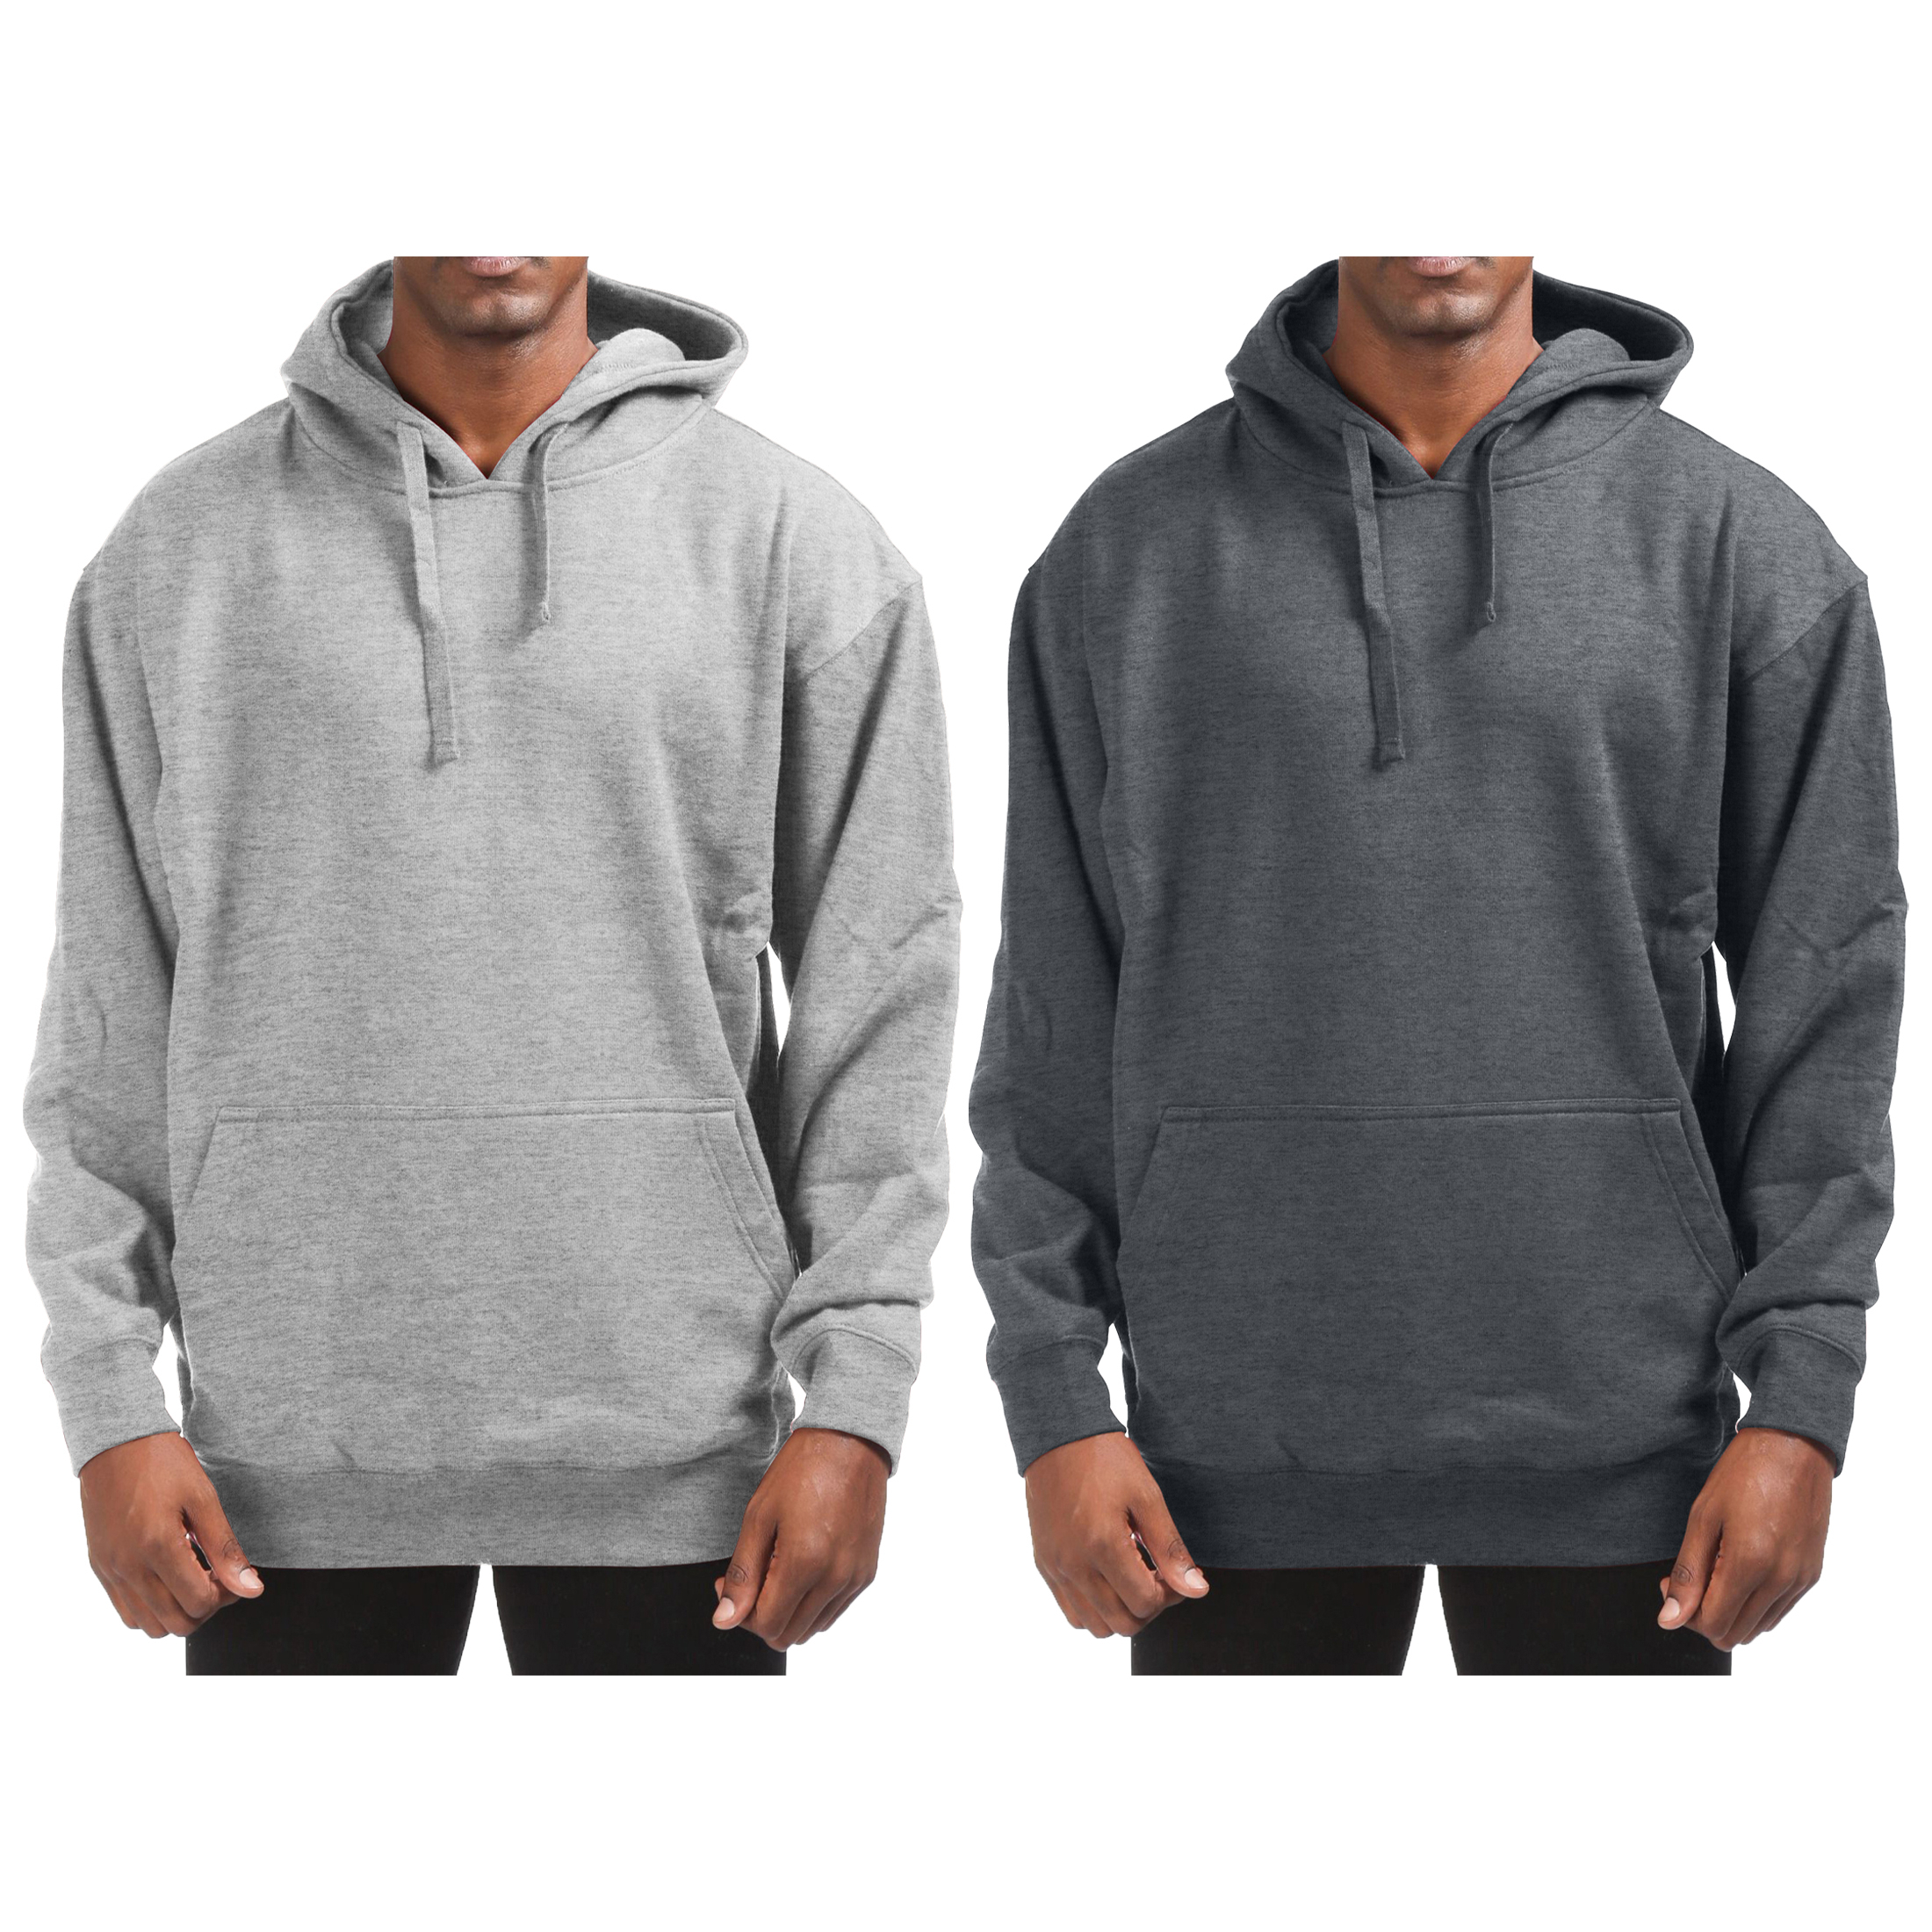 1-PACK Men's Cotton-Blend Fleece Pullover Hoodie With Pocket - M